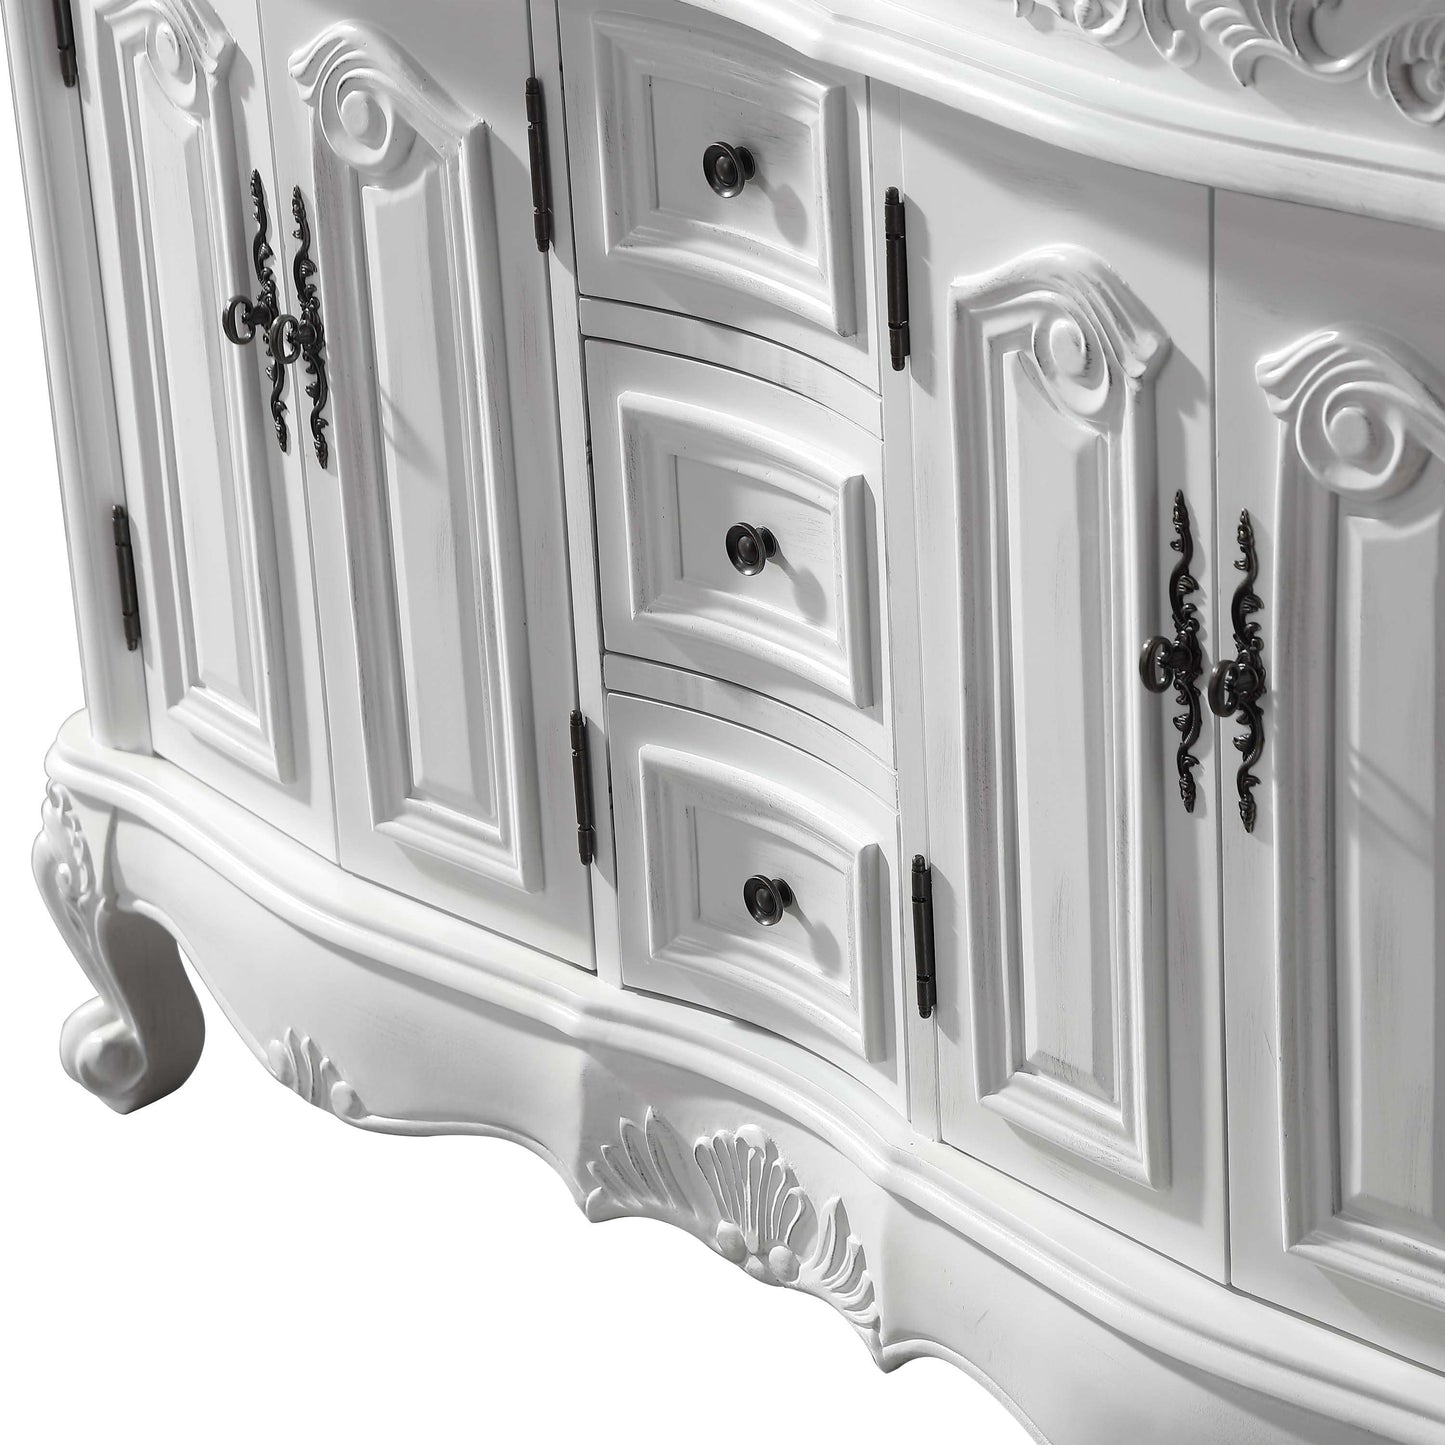 Silkroad Exclusive Silkroad Exclusive 48" Double Sink Cabinet with Carrara White Top HYP-0145-WM-UWC-48